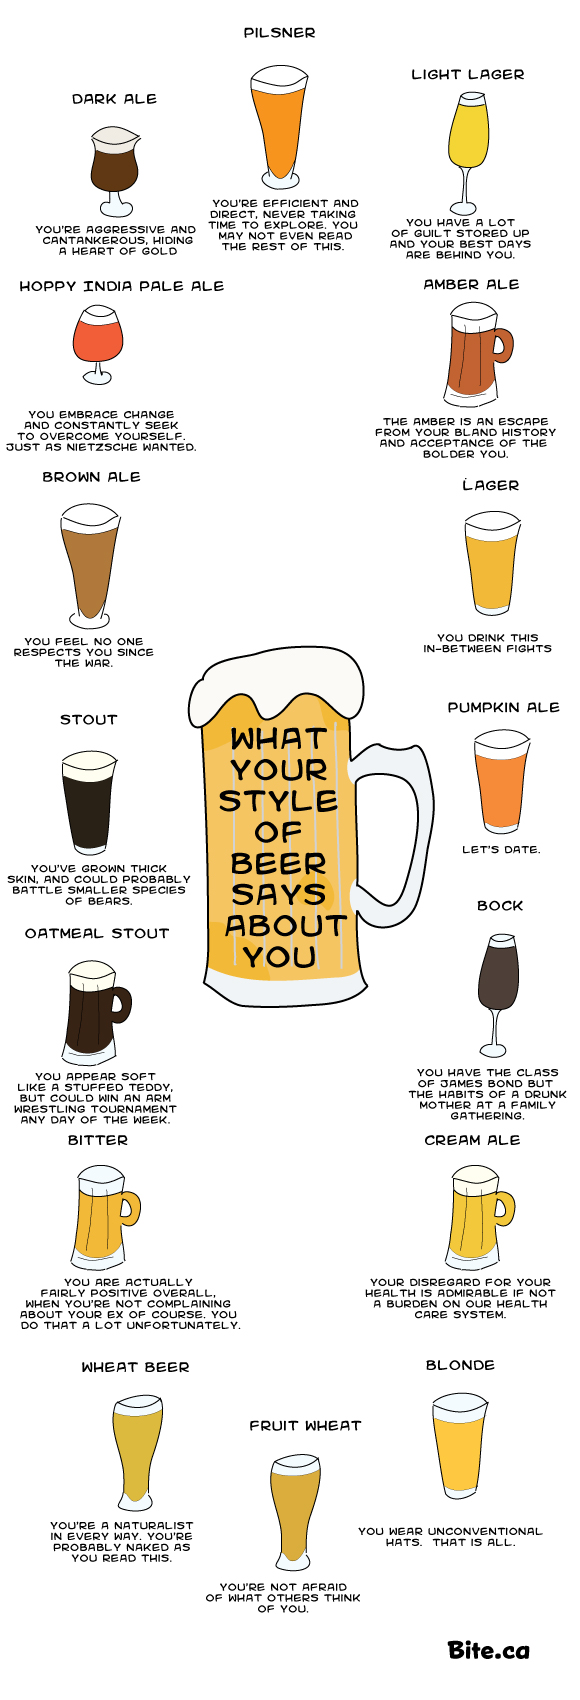 what-r-beer-says-about-you